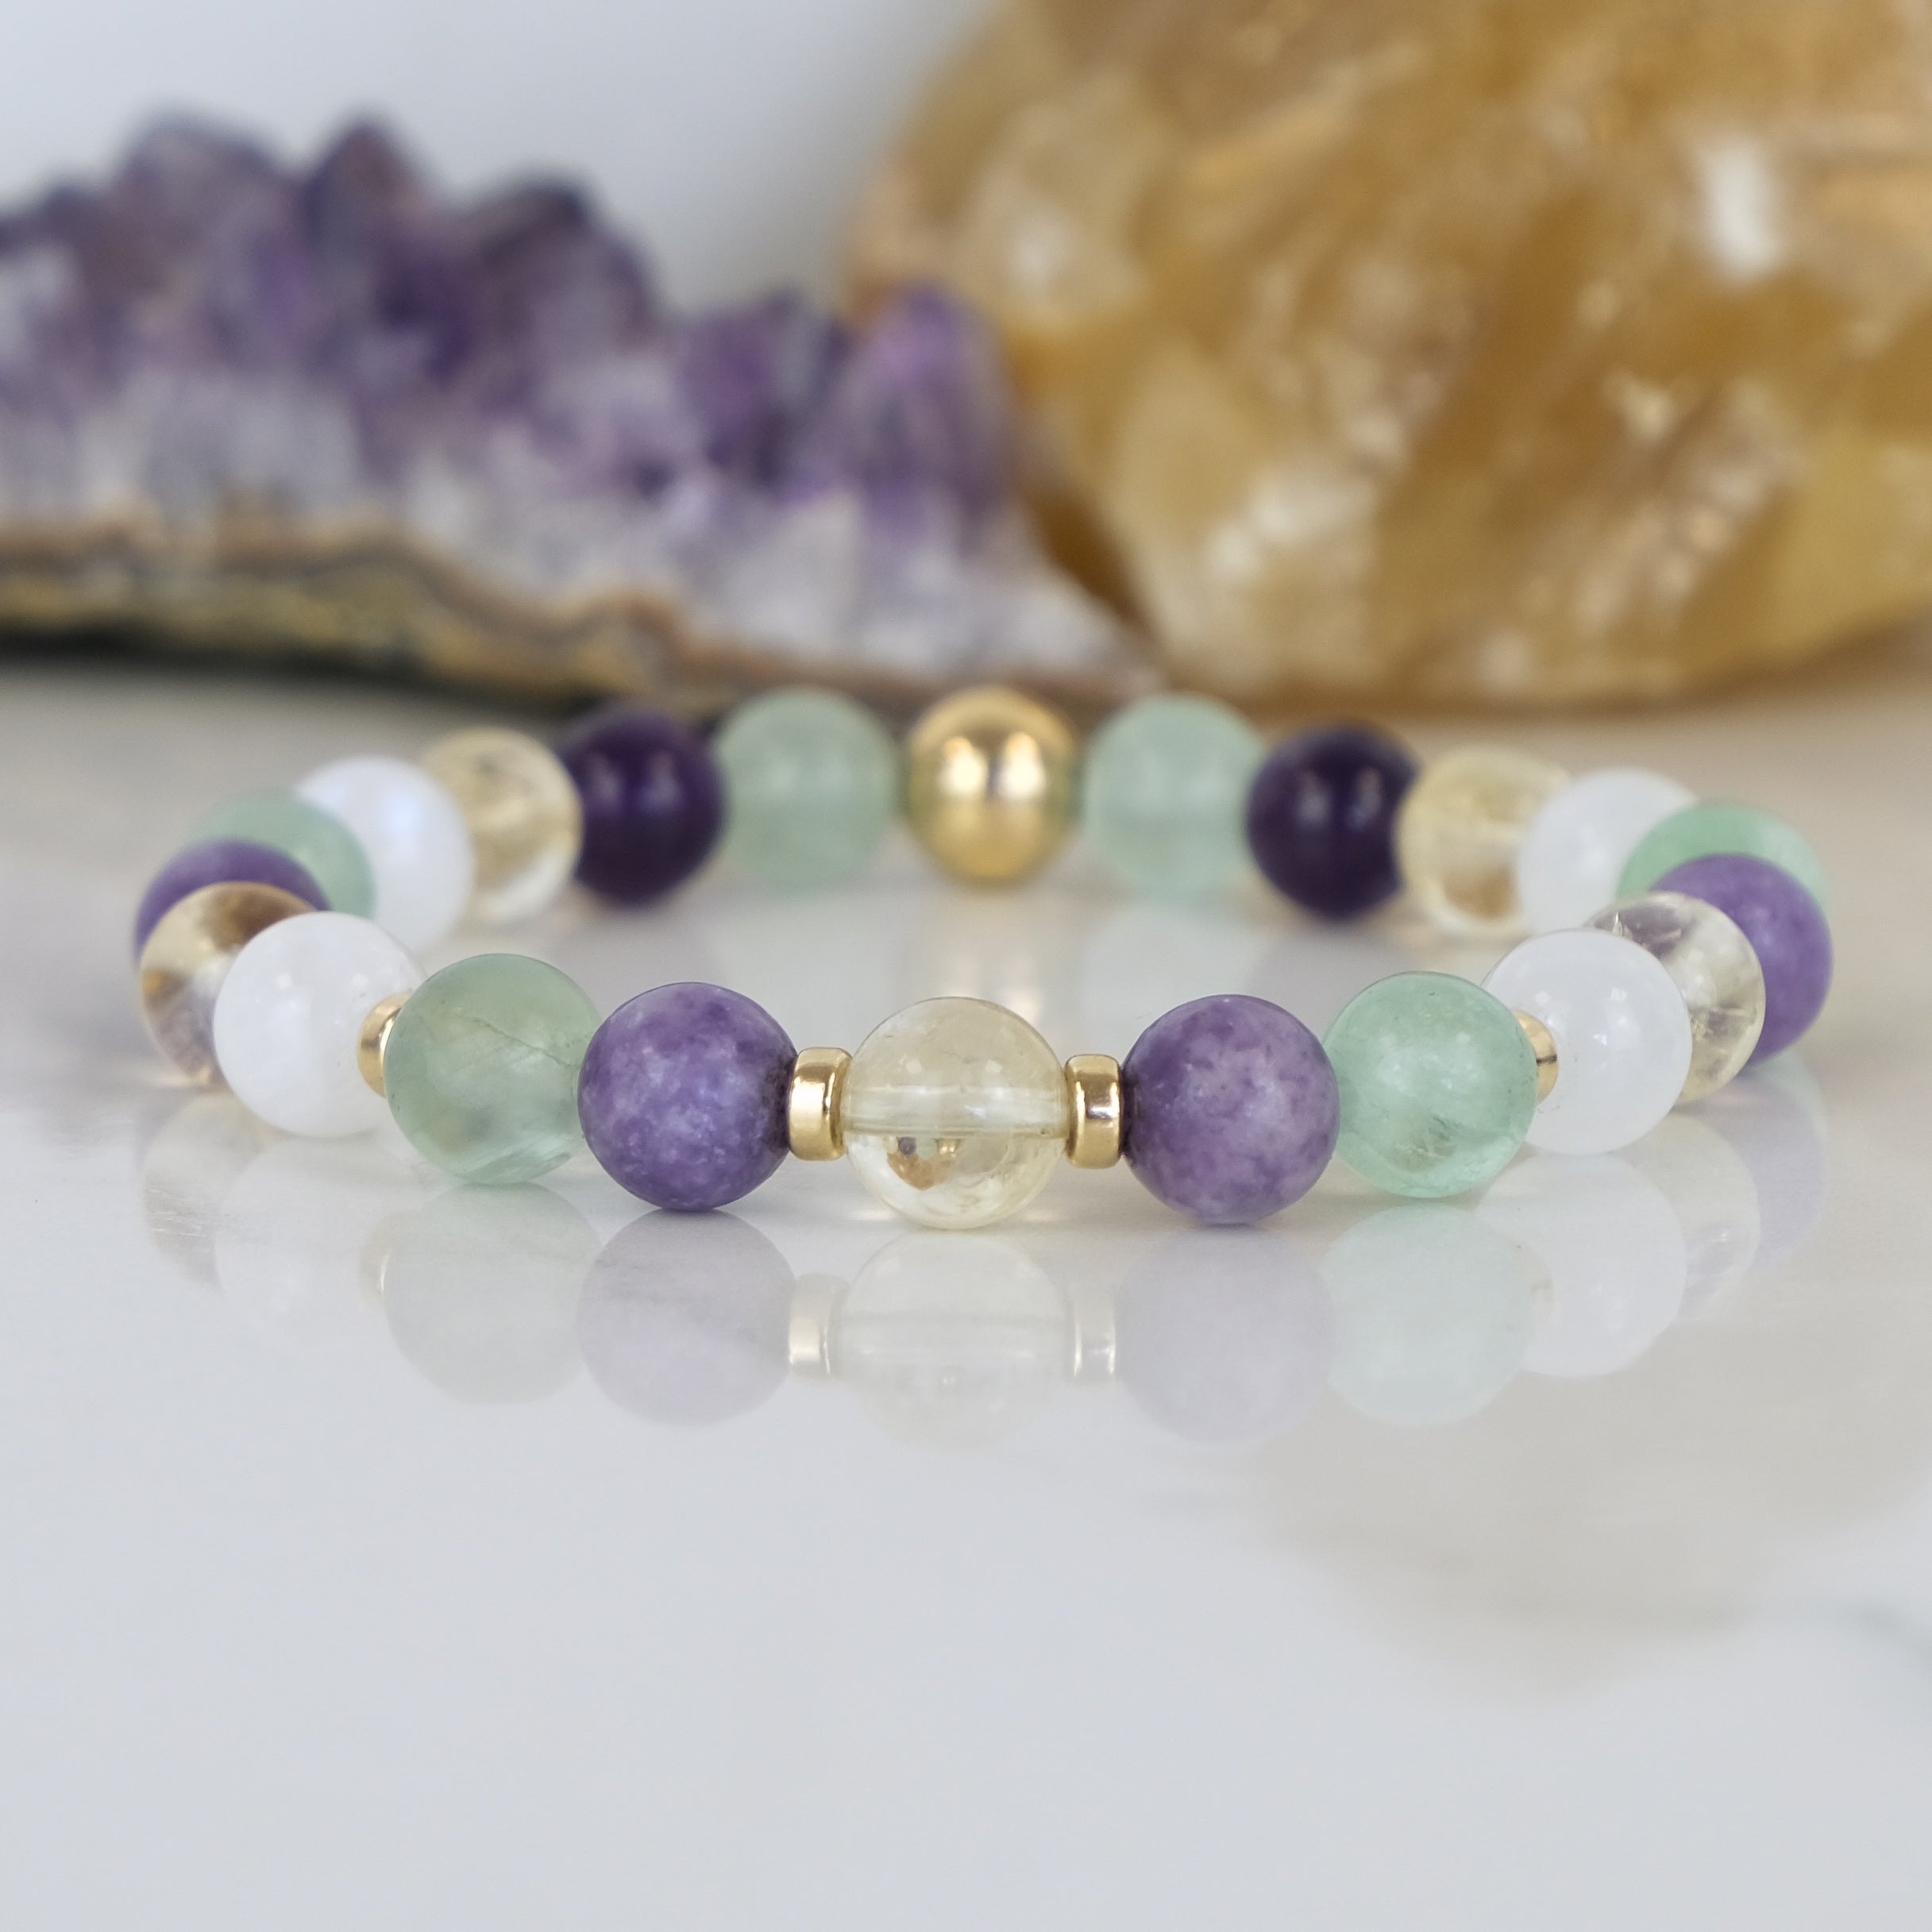 Samayla menopause gemstone bracelet in 8mm beads with gold filled accessories